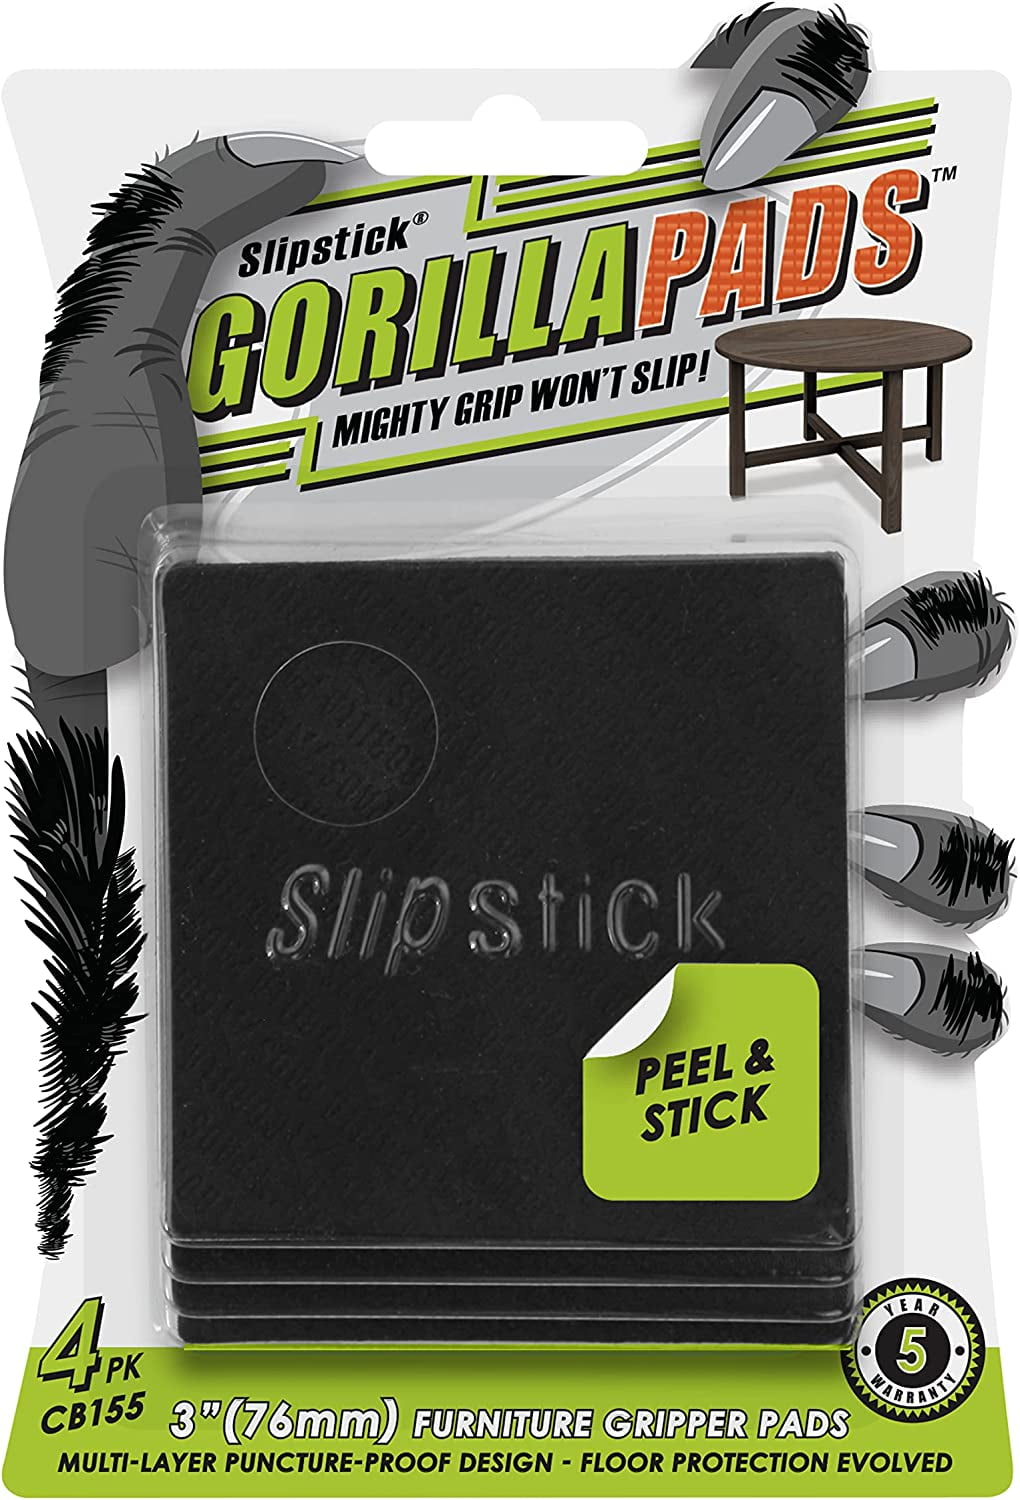 Slipstick GorillaPads CB149 Non-Slip Furniture Pads/Rubber Grippers (Set of  8) Self-Adhesive Furniture Feet Floor Protectors, 1-1/2 inch Round, Black 